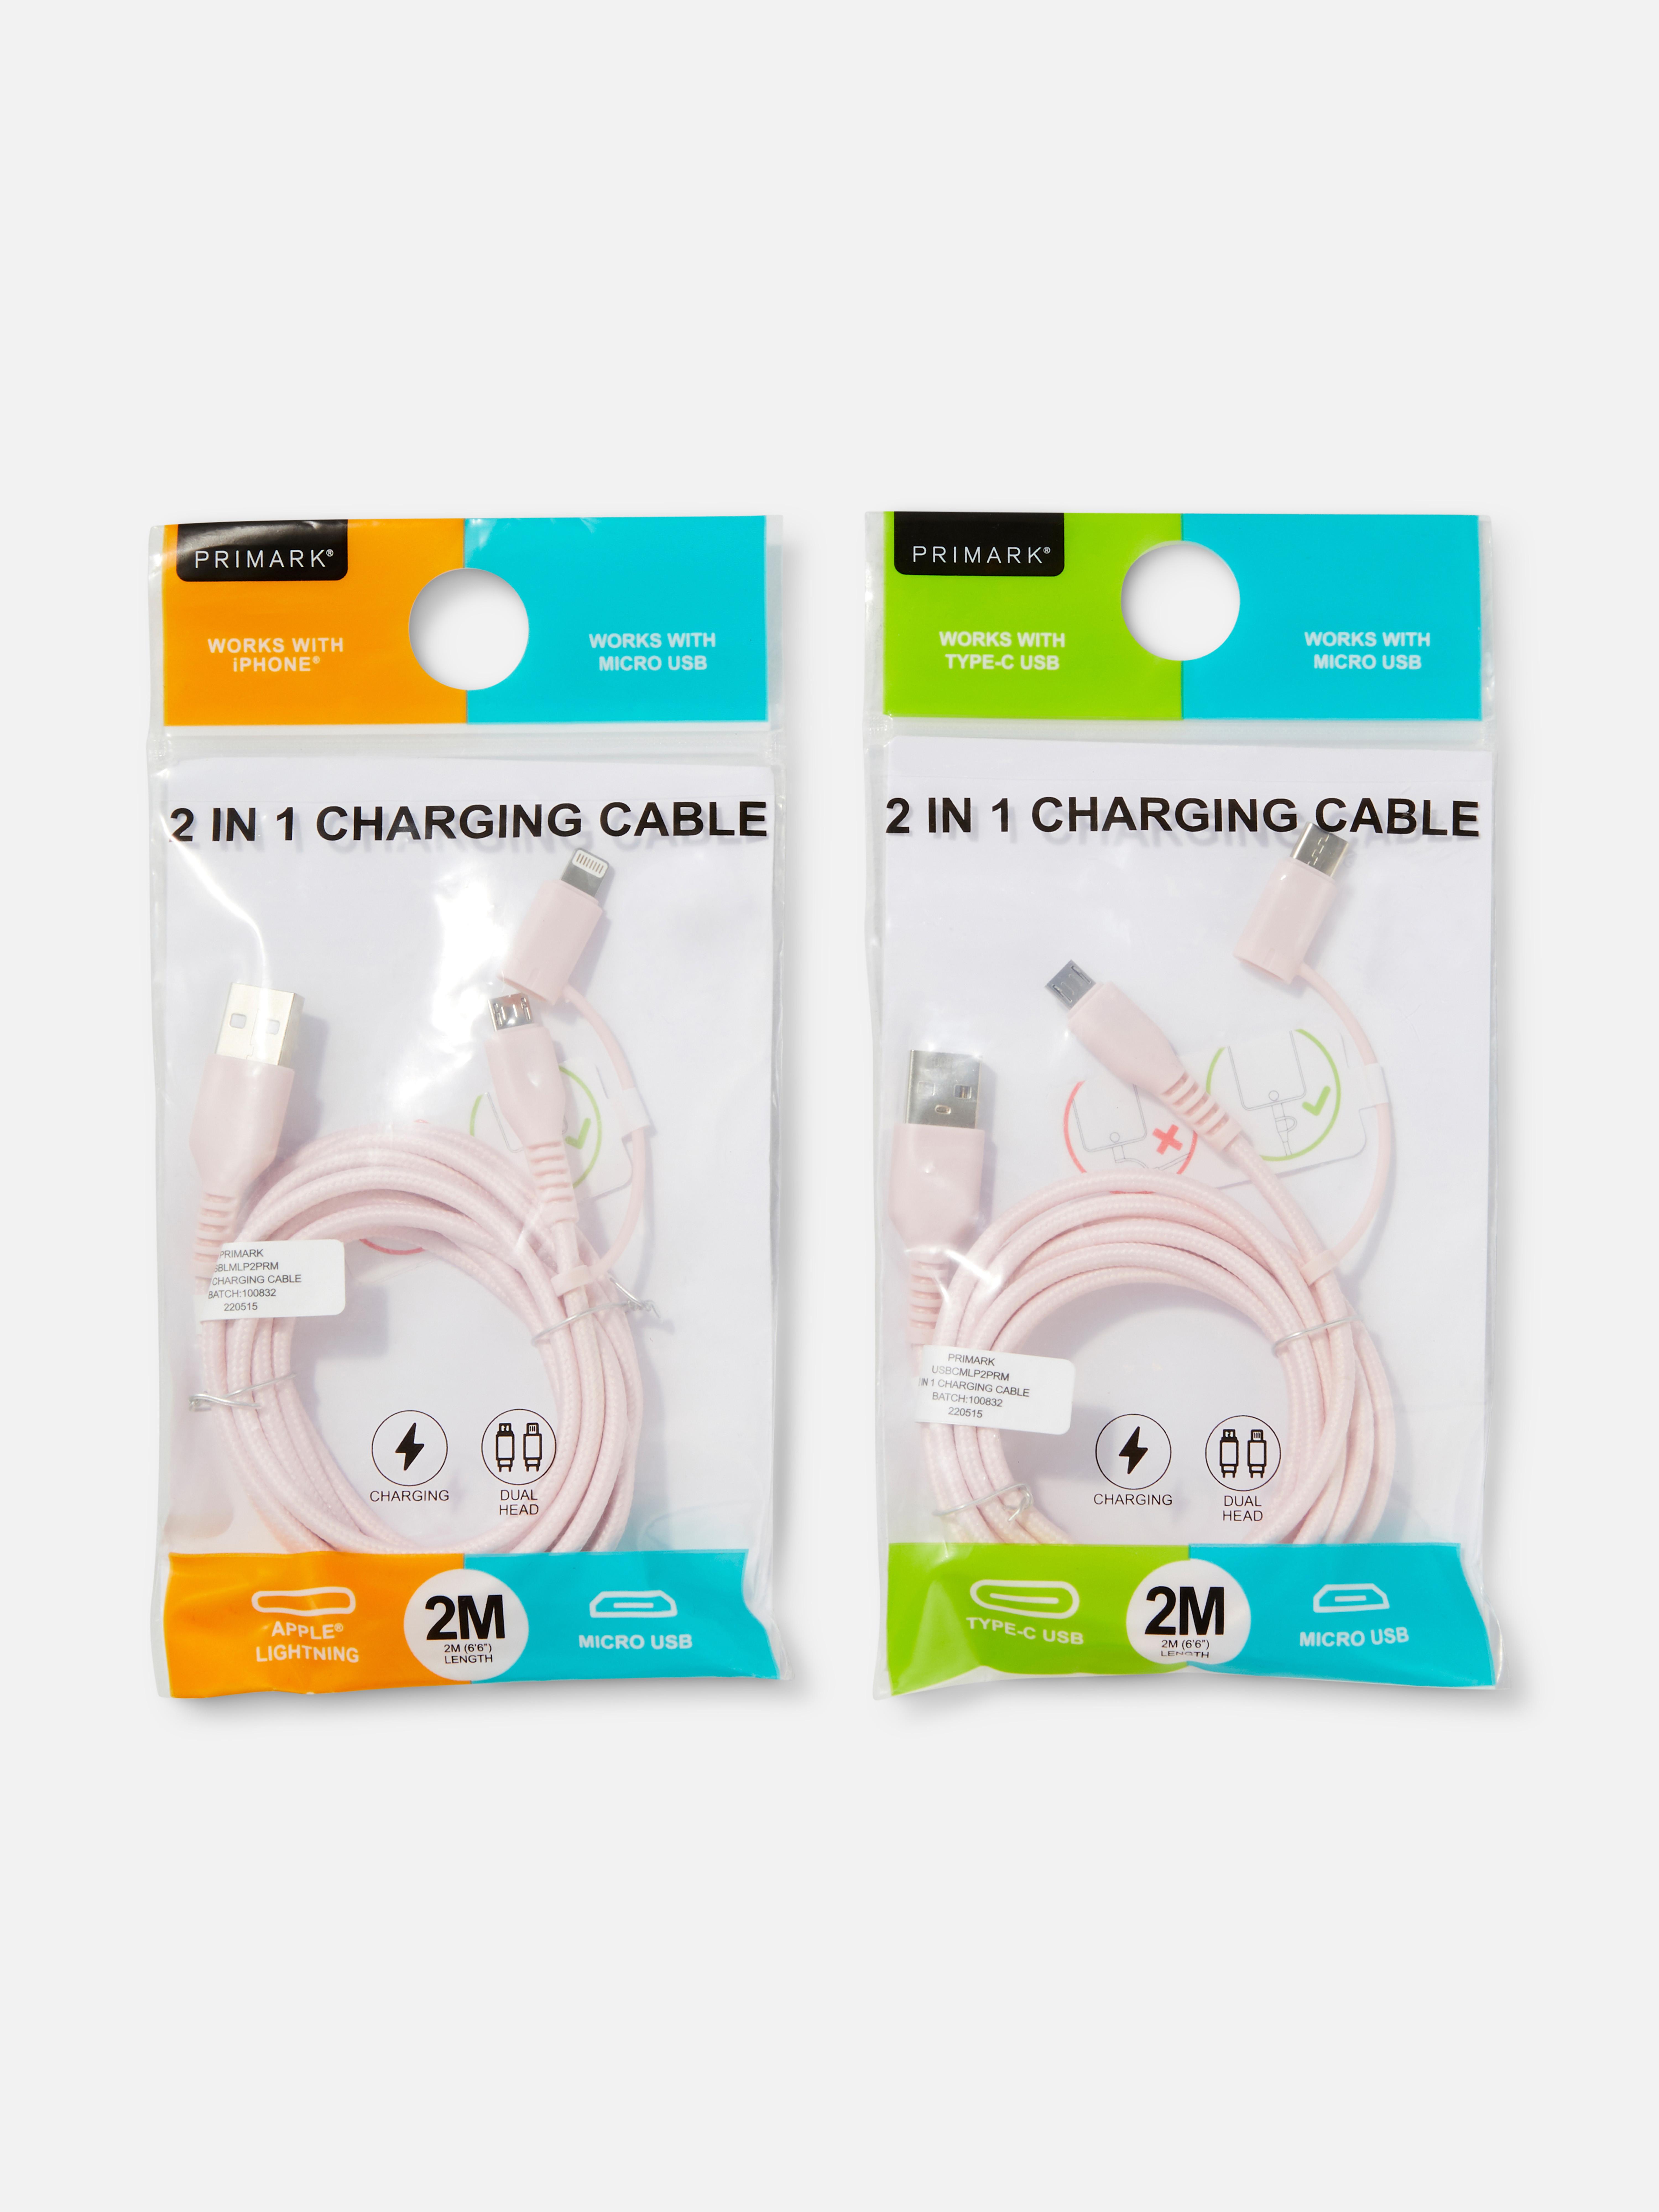 2 in 1 2m Charging Cable